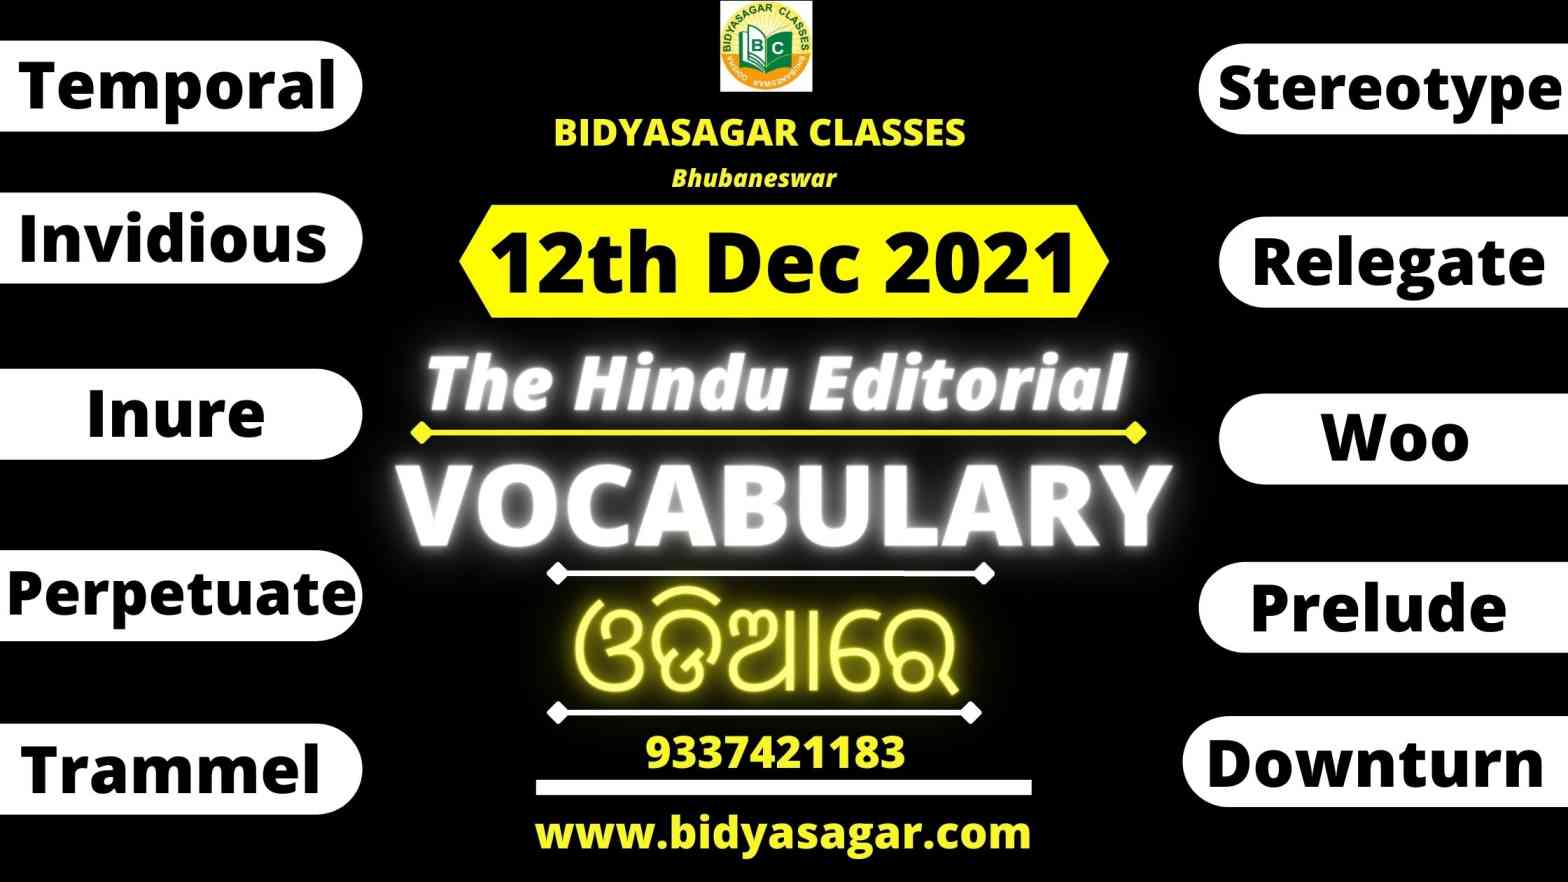 The Hindu Editorial Vocabulary of 12th December 2021